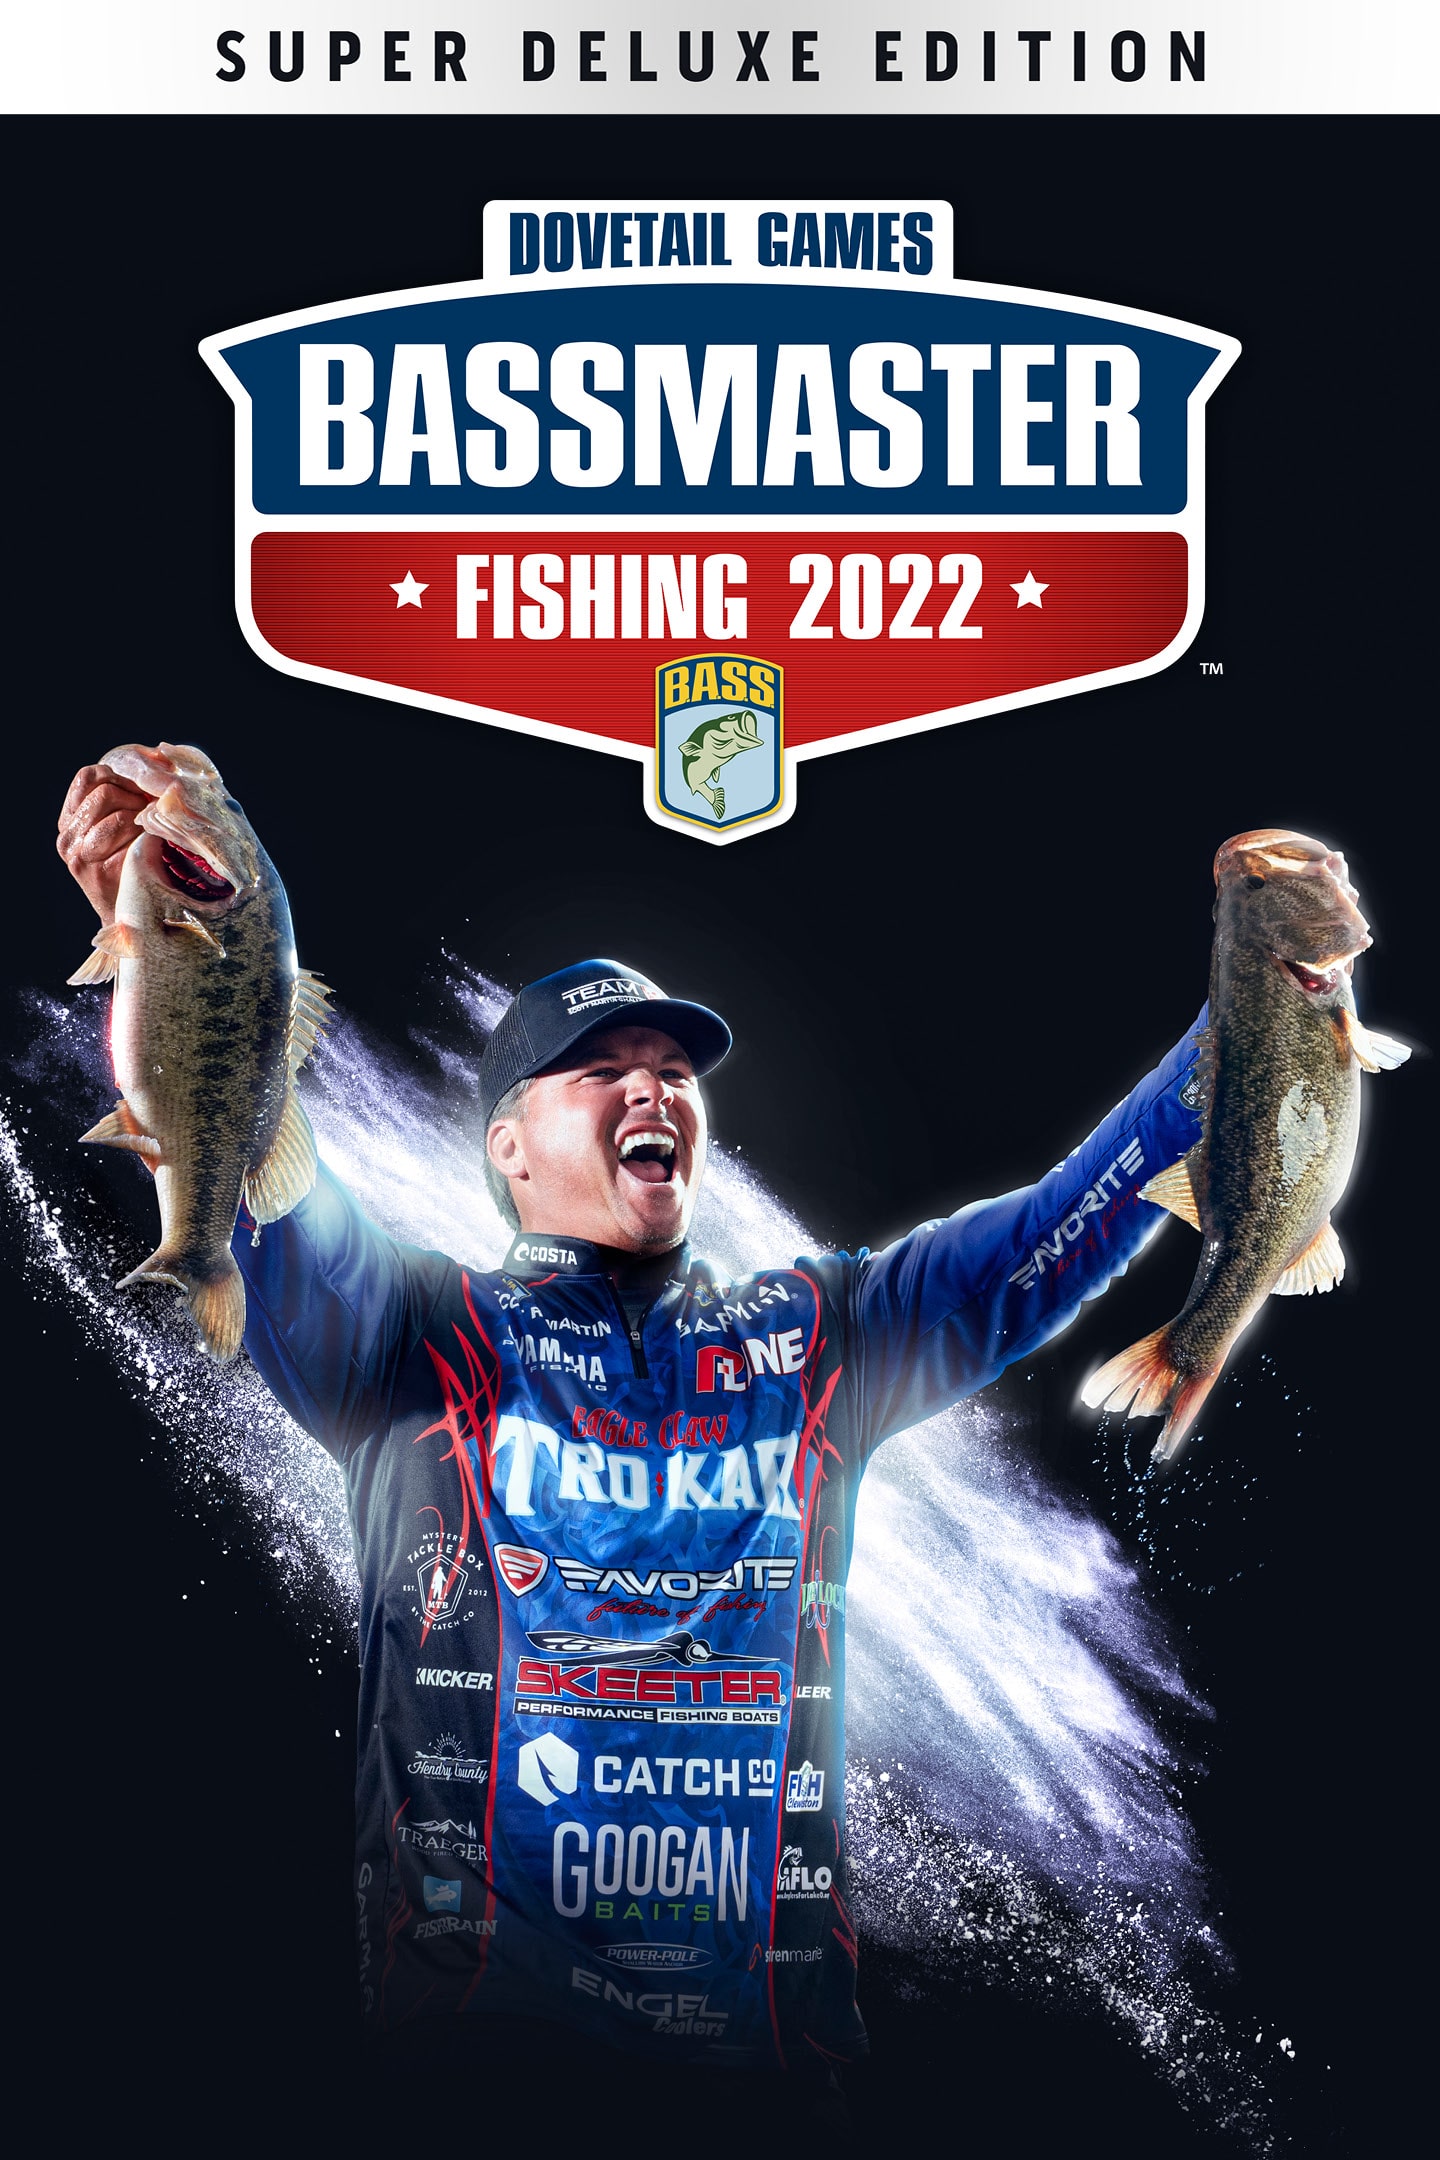 Bassmaster® Fishing: PS5™ Edition Deluxe and PS4™